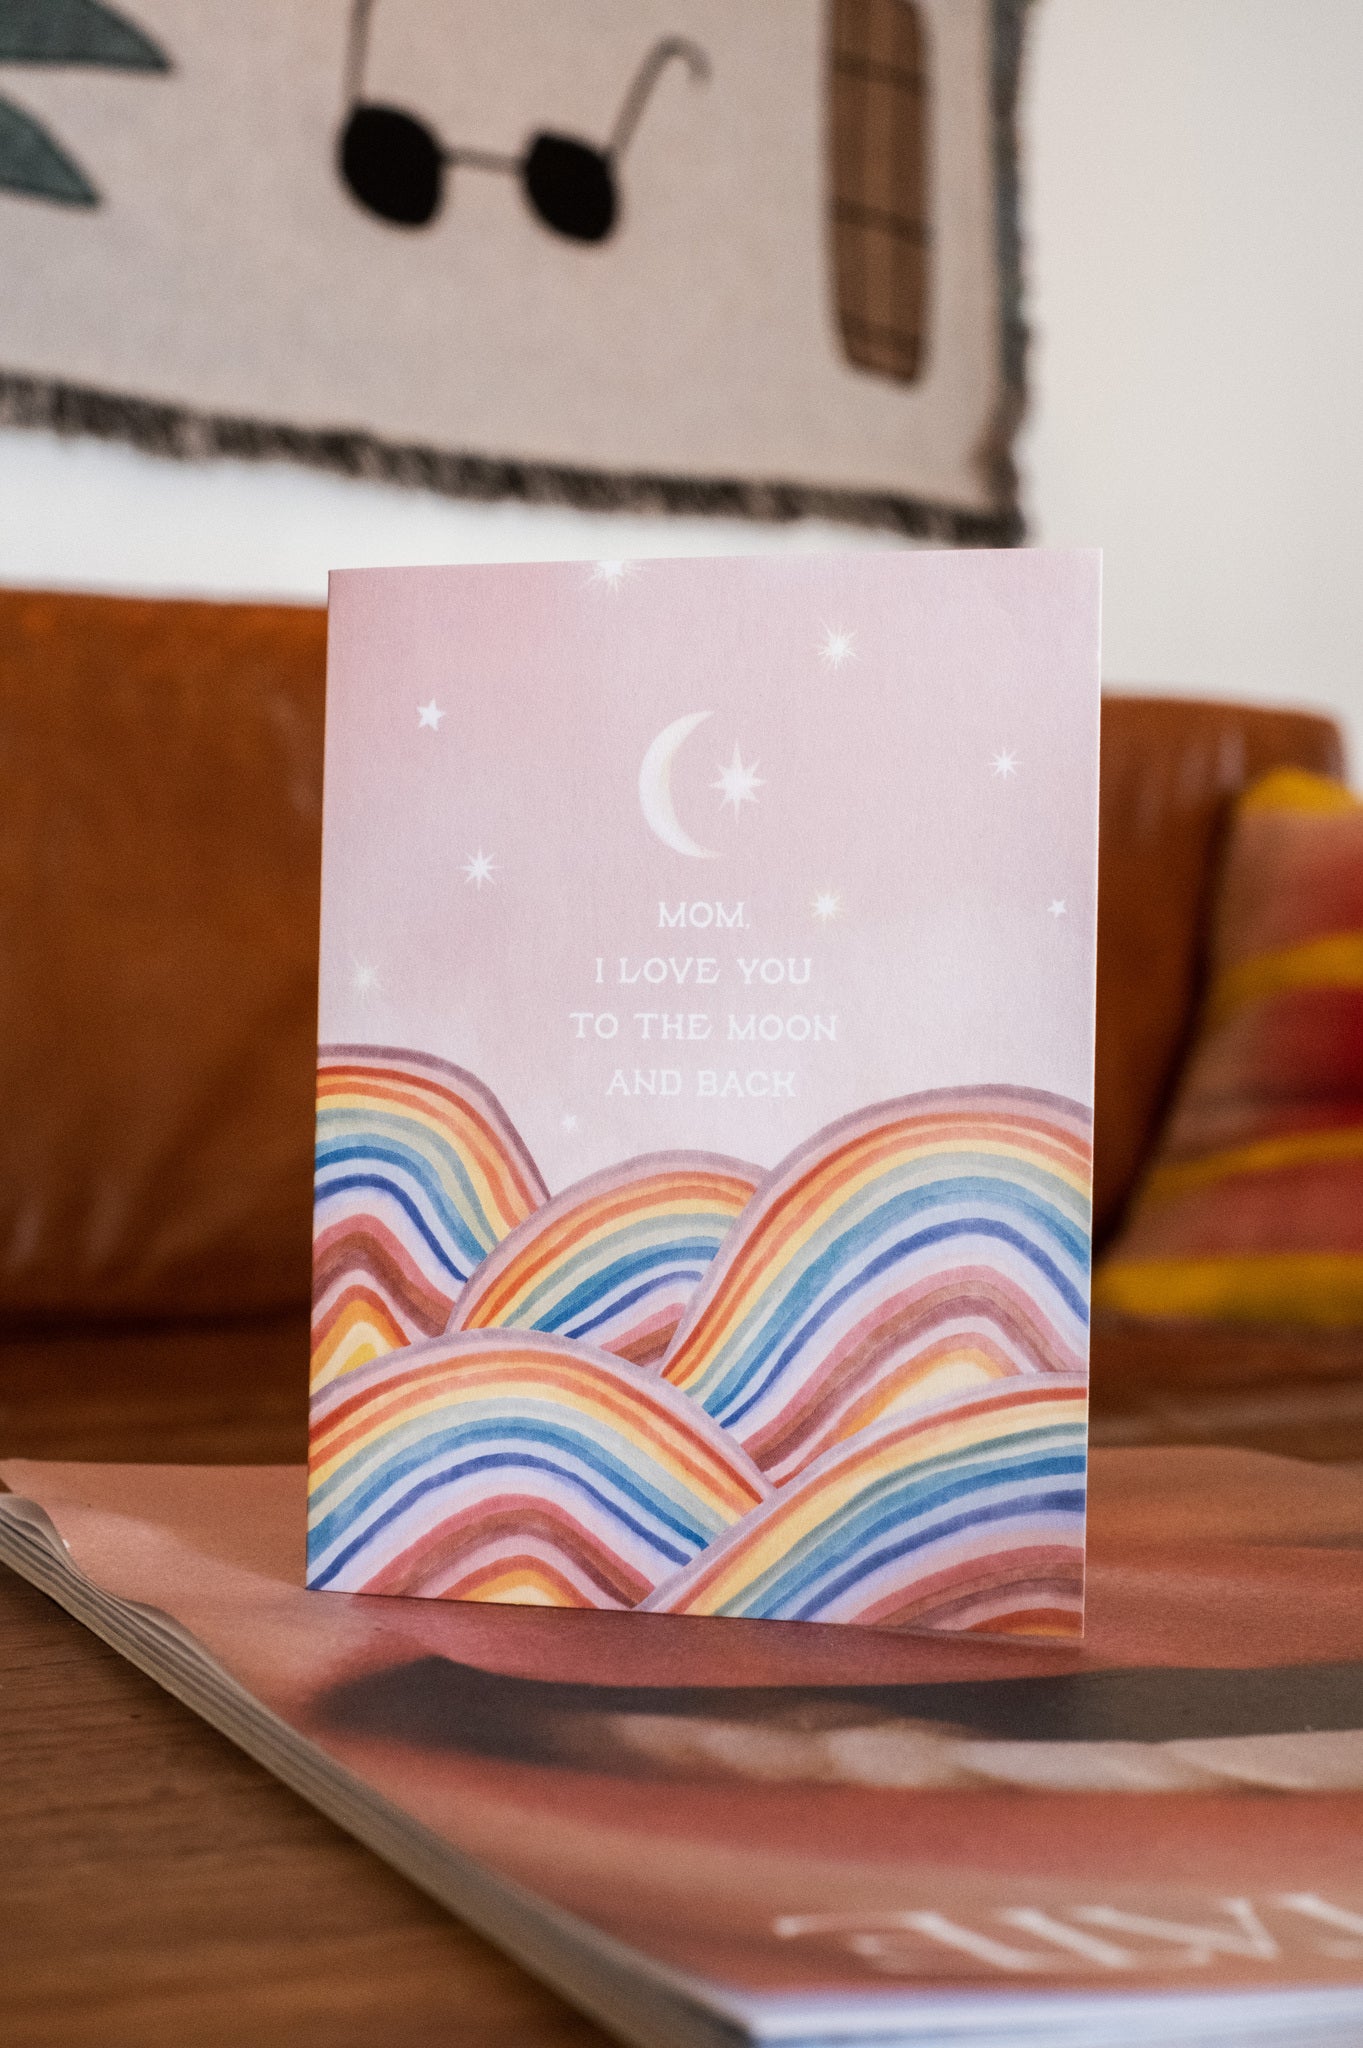 Adelfi card with the words &quot;Mom, I love you to the moon and back&quot; floating in a pink sky with a crescent moon and stars above rainbow hills. Card is modeled on a coffee table in a living room.